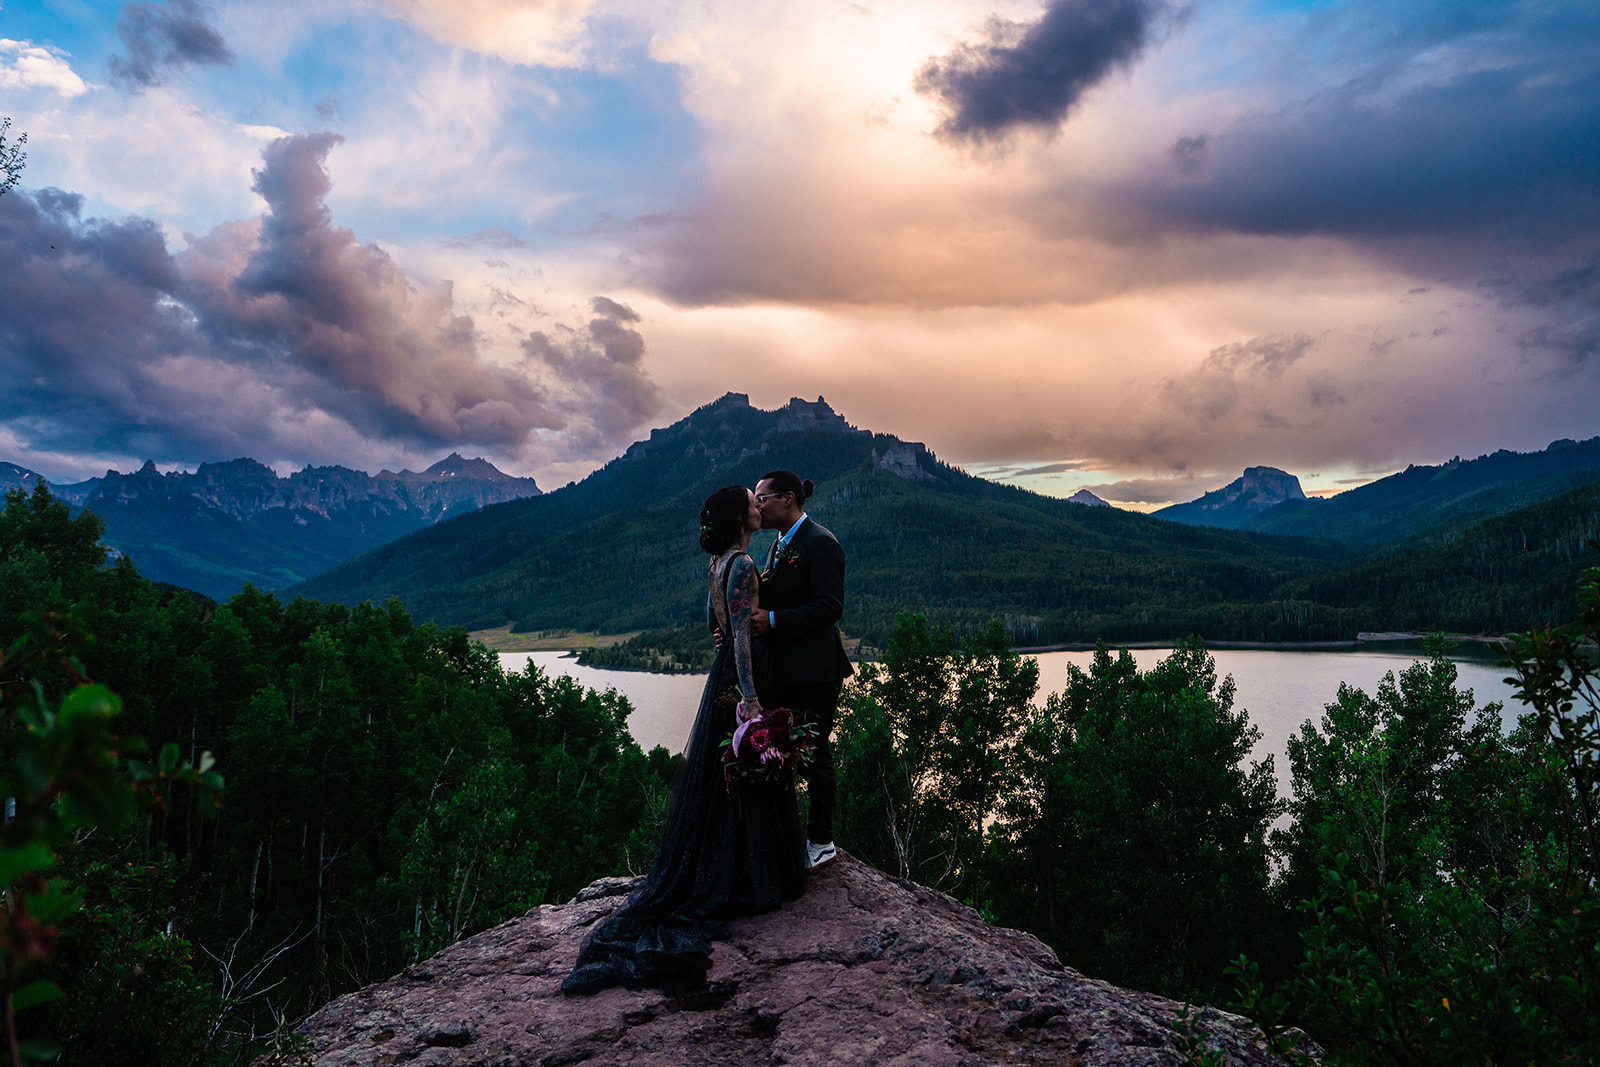 Celestial Themed elopement during a Full Moon